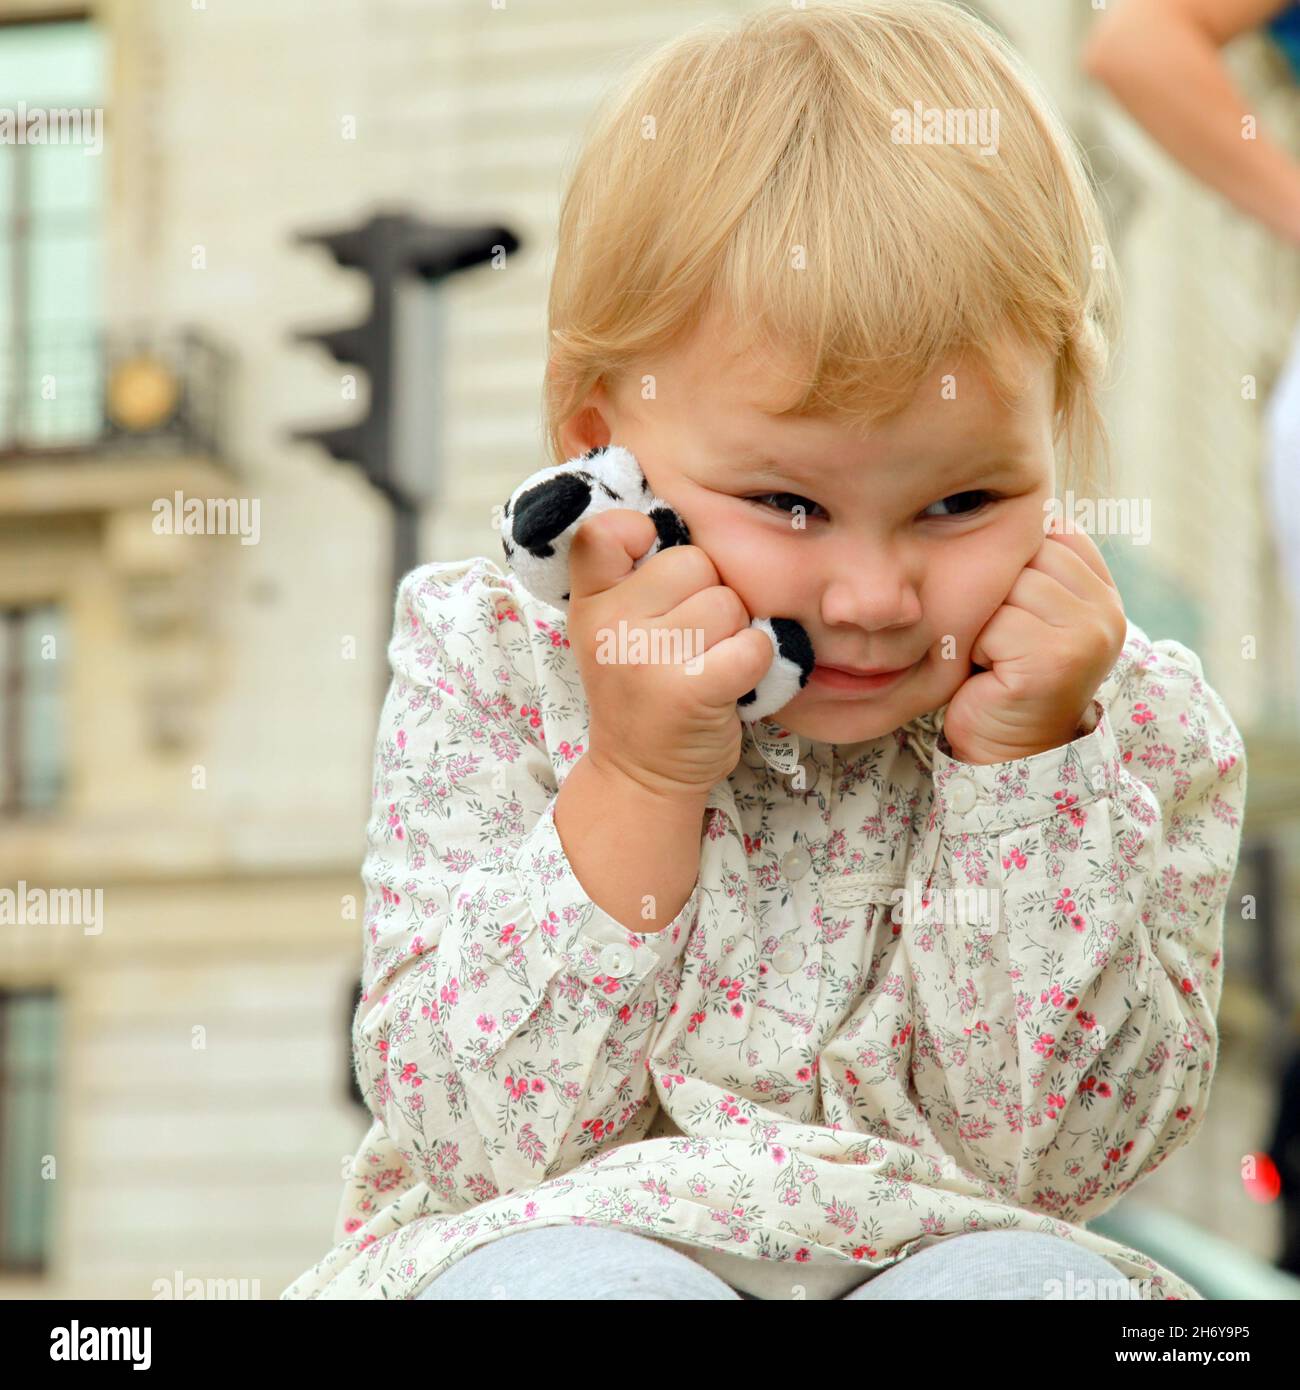 Angry blond baby girl with a toy in hands Stock Photo